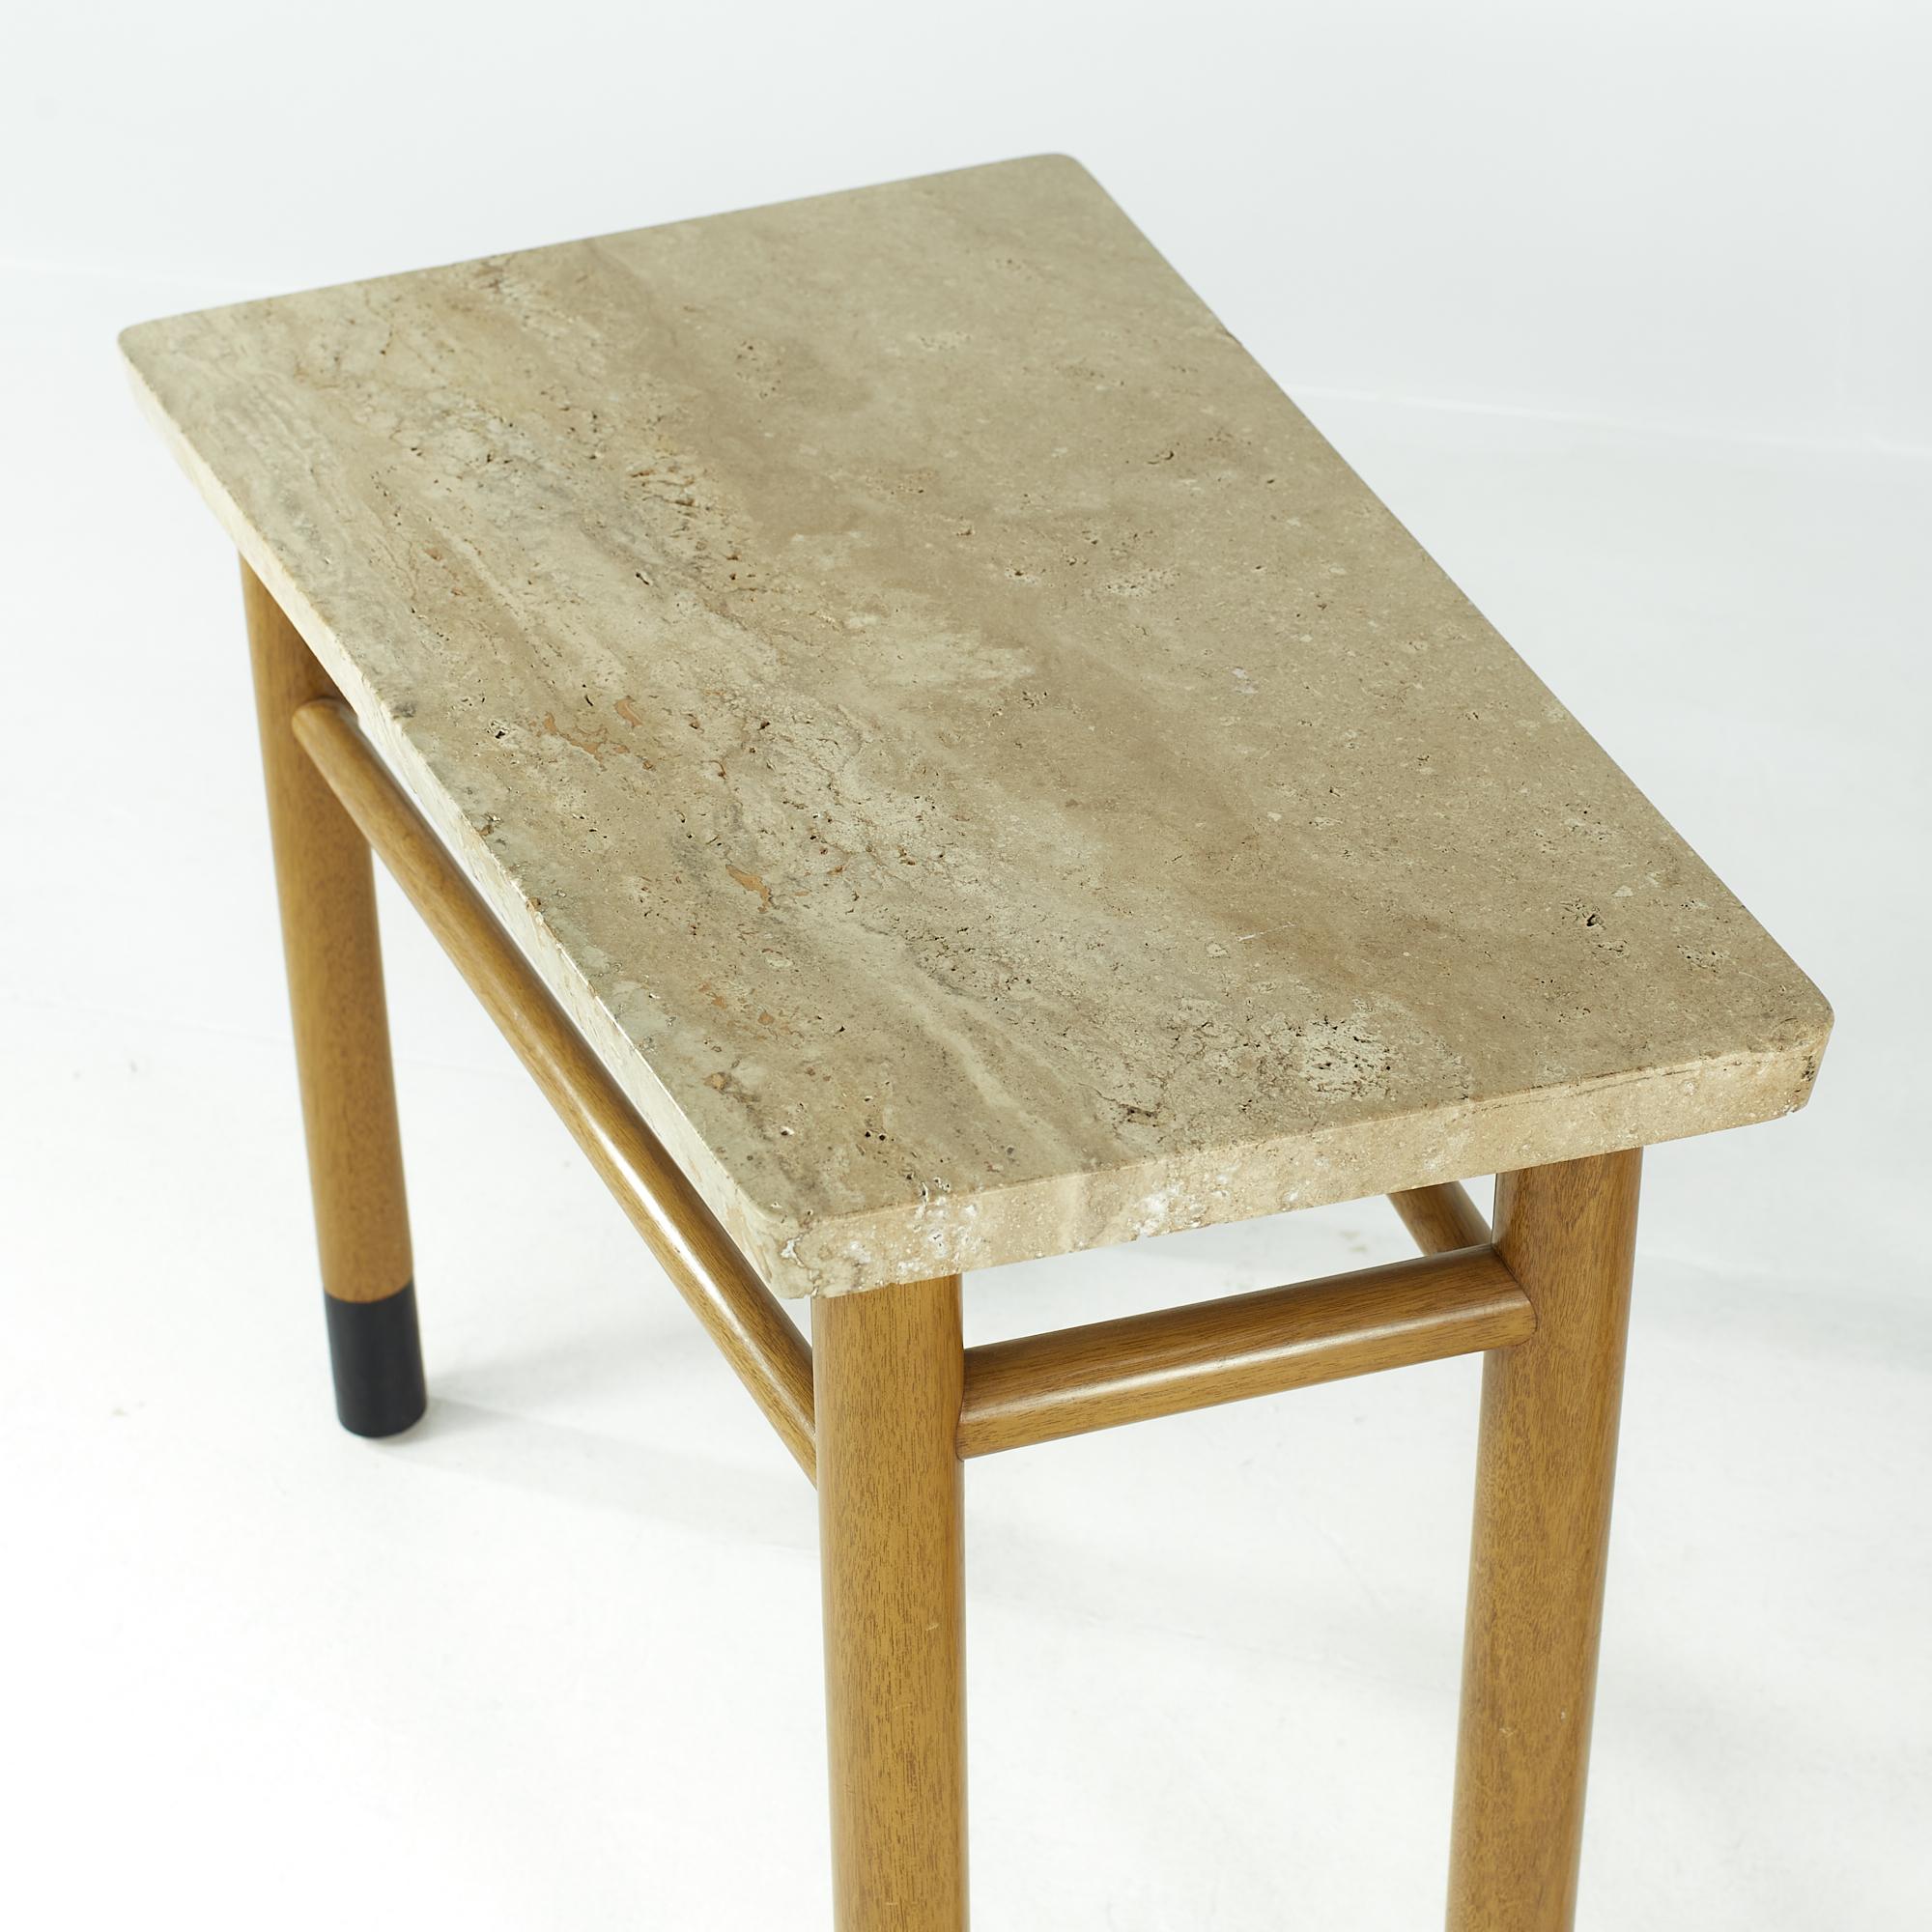 Edward Wormley for Dunbar Midcentury Travertine Wedge Tables, Pair For Sale 6